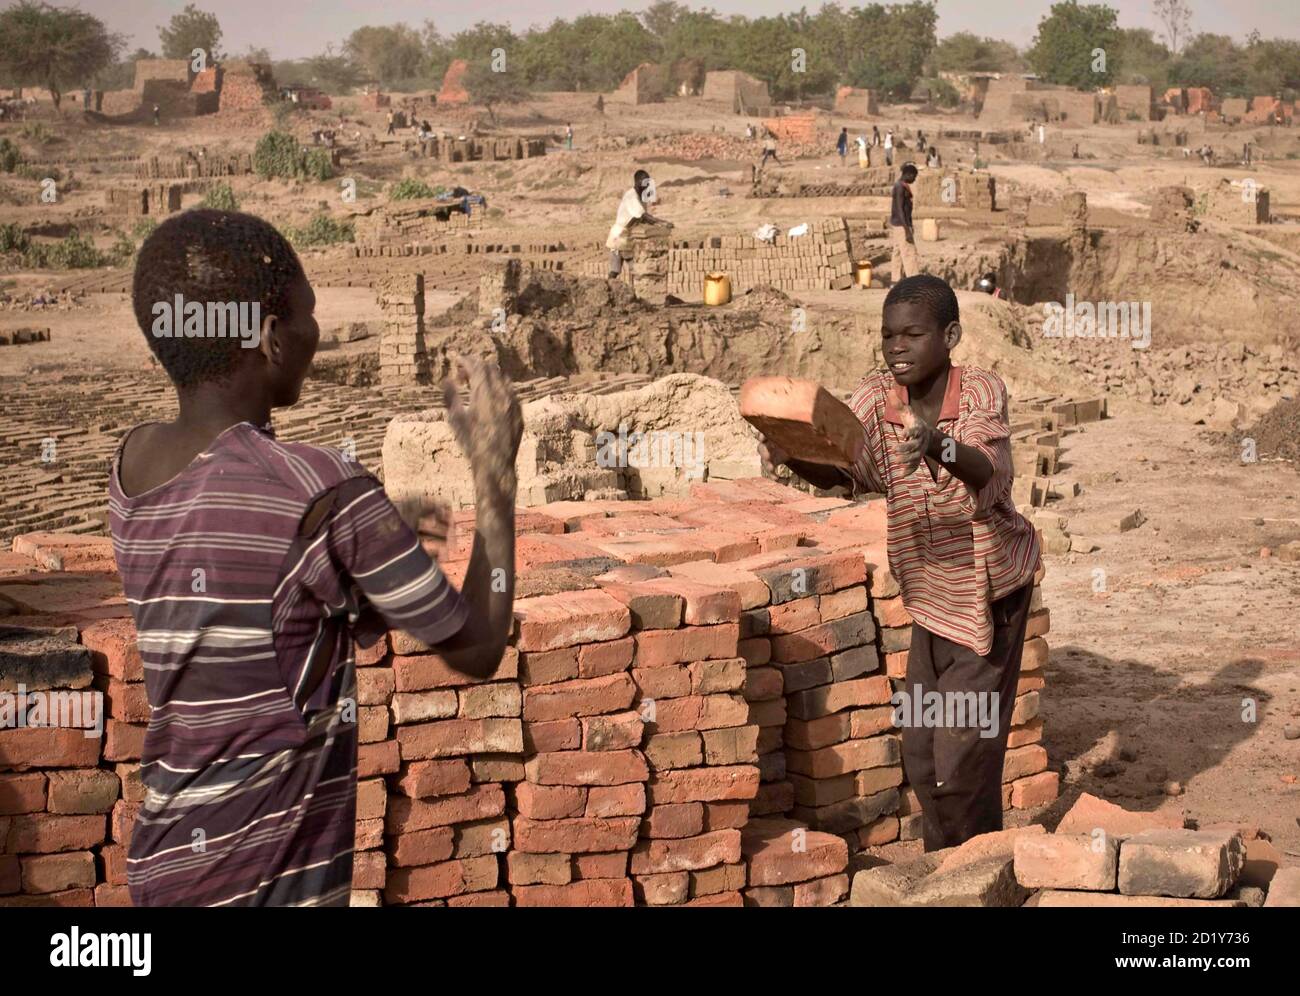 Boys toss bricks for stacking at a riverside factory where mud is fired in kilns to produce building materials on the outskirts of Chad's capital N'Djamena, May 31 2008. Many children are used as cheap labour to transport bricks. REUTERS/Finbarr O'Reilly (CHAD) Stock Photo